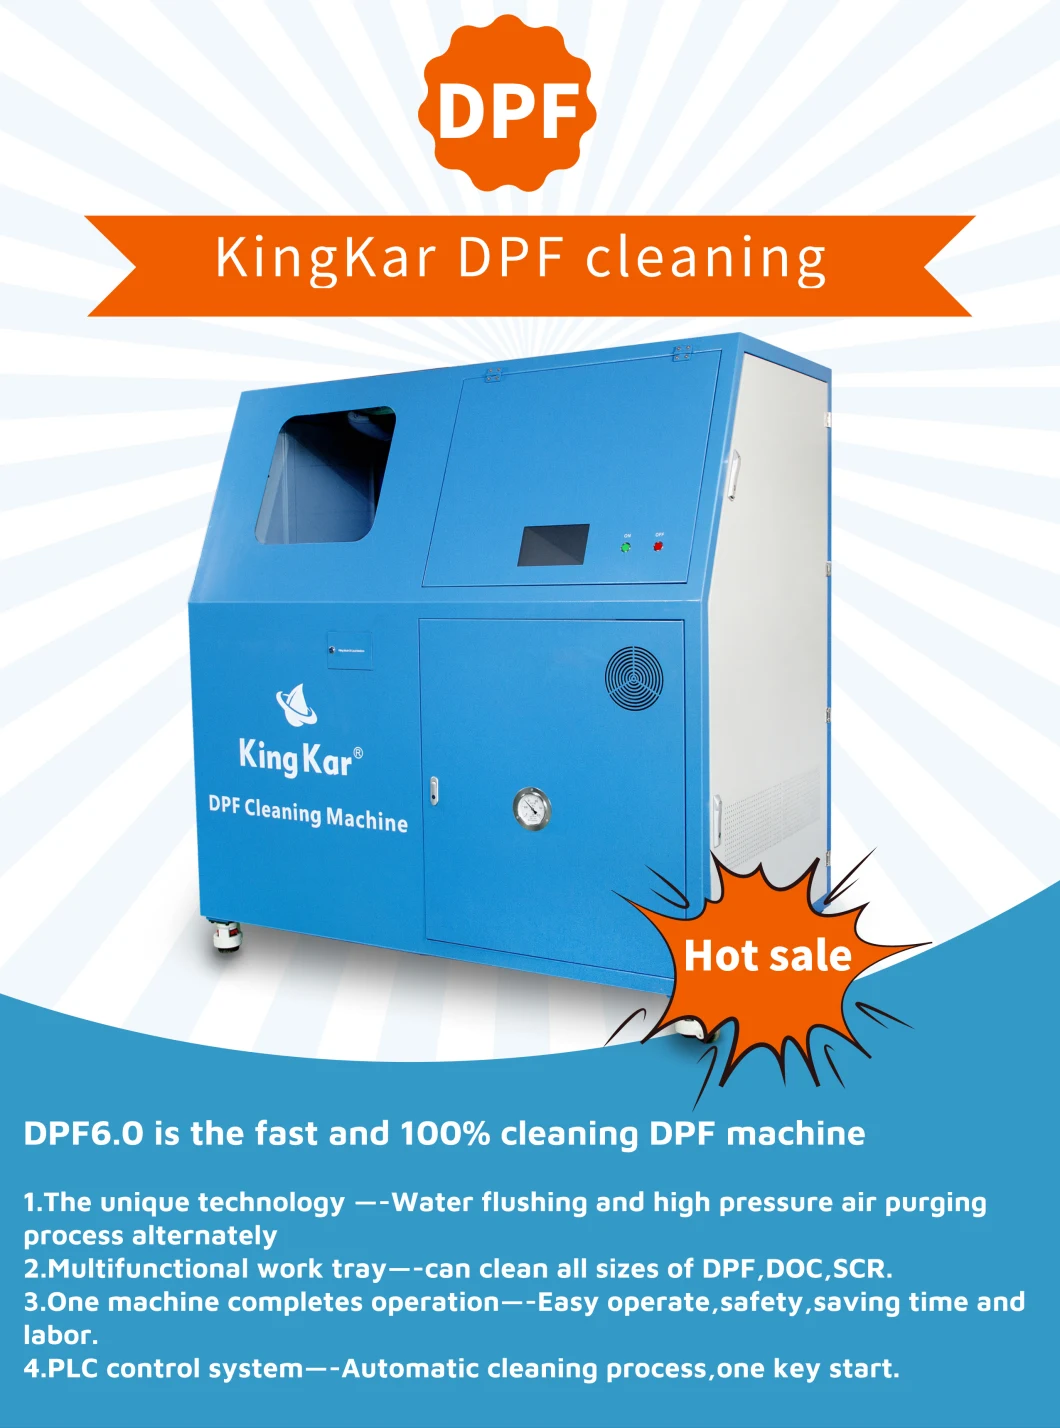 Ultrasonic Diesel Particulate Filter Cleaning Machine Cleaning for Cars Vans Trucks All Kinds of DPF